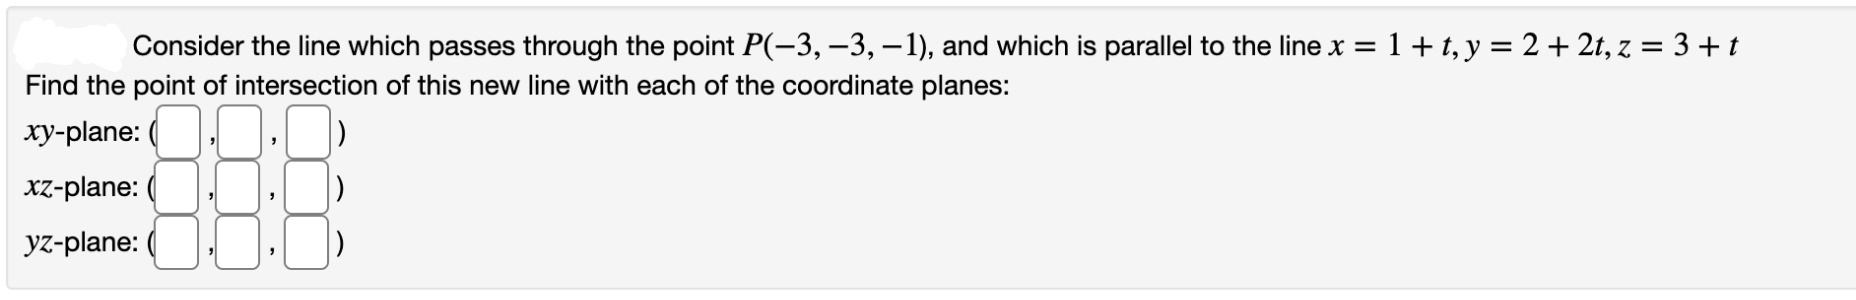 Consider the line which passes through the point P(-3, –3, –1), and which is parallel to the line x =1+t, y = 2 + 2t, z = 3 +t
Find the point of intersection of this new line with each of the coordinate planes:
xy-plane:
xz-plane:
yz-plane:
